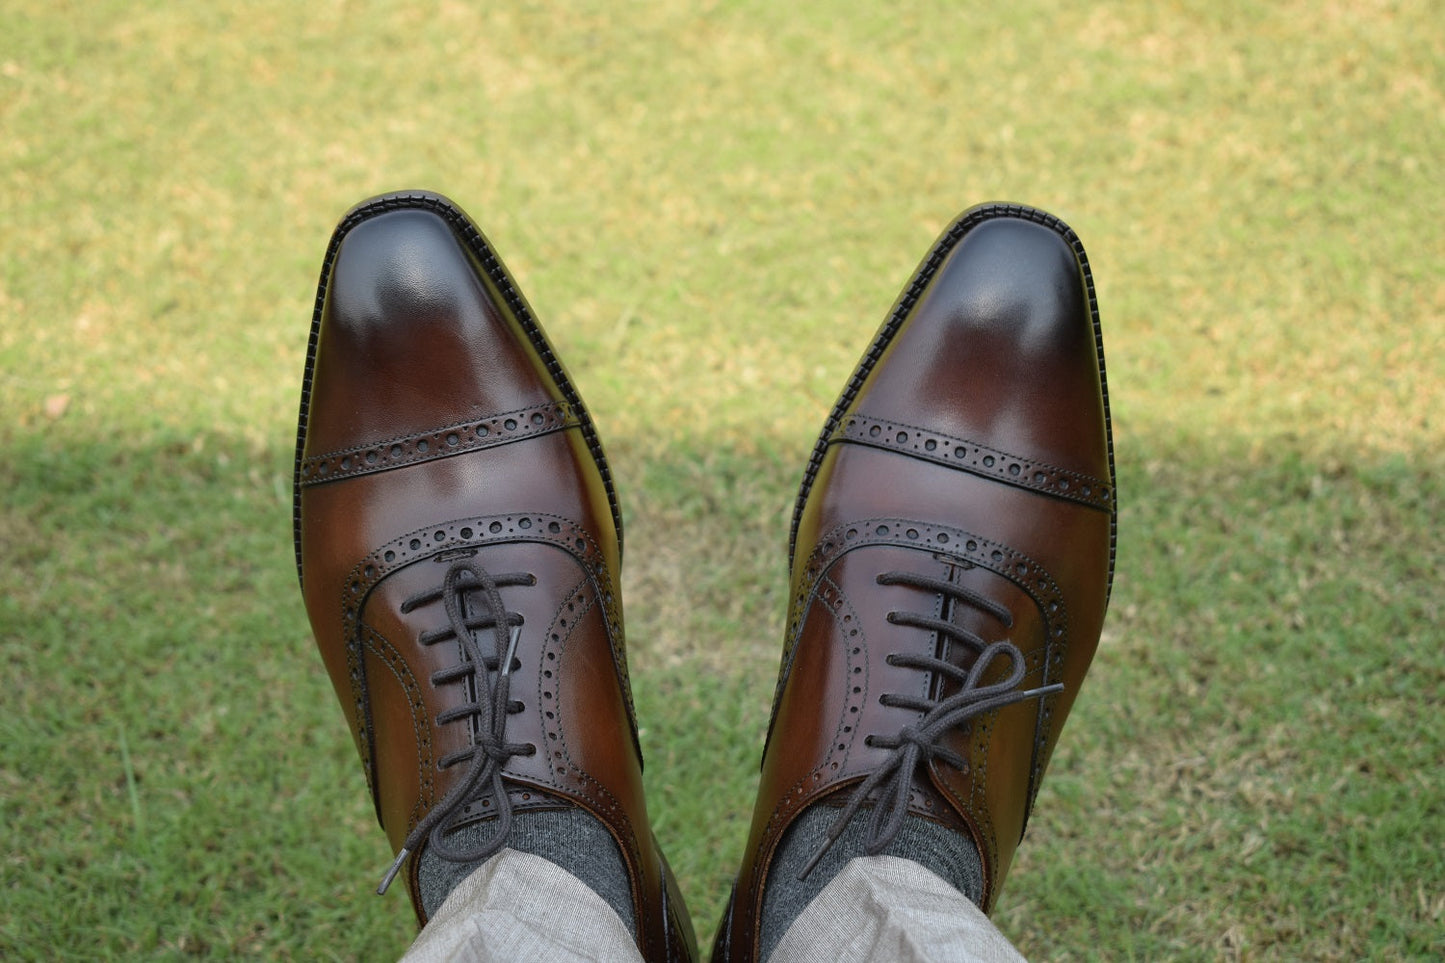 Oxford Handmade Leather Shoes